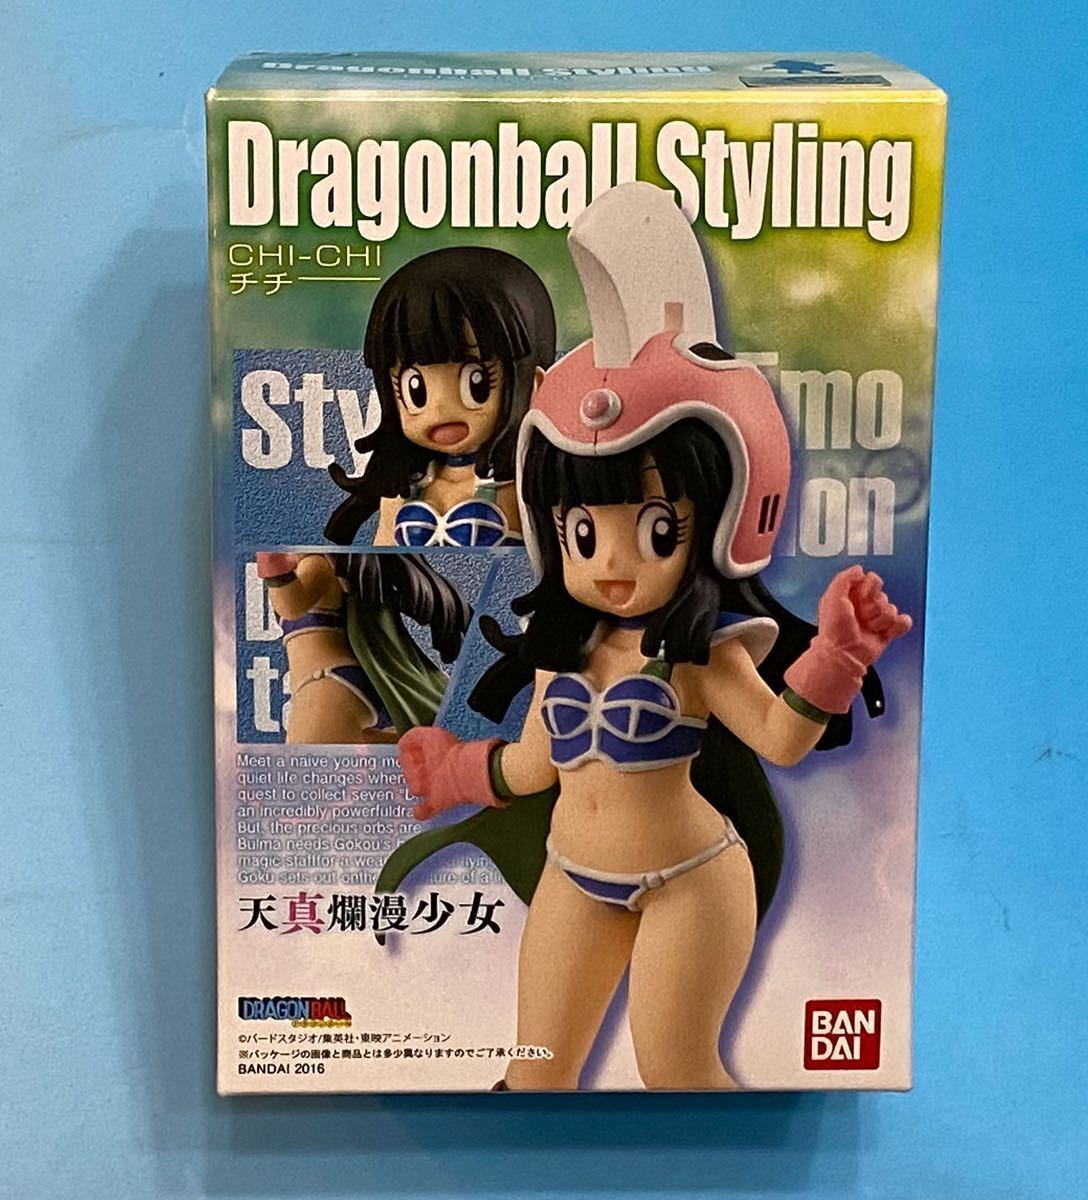 Only one left     BANDAI DRAGON POLE CHI CHI  brand new unopened